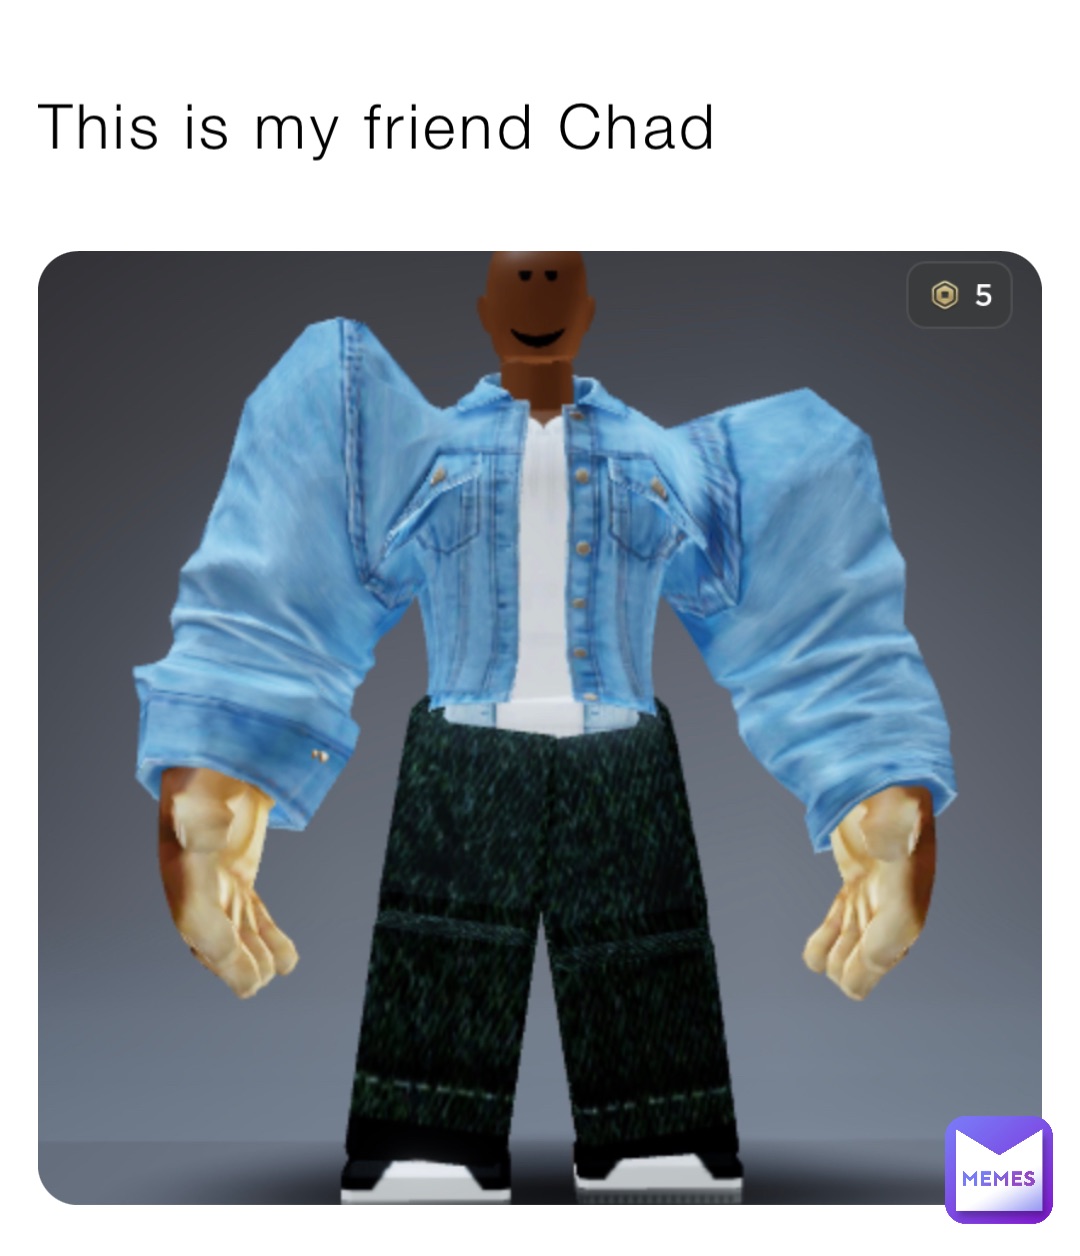 This is my friend Chad